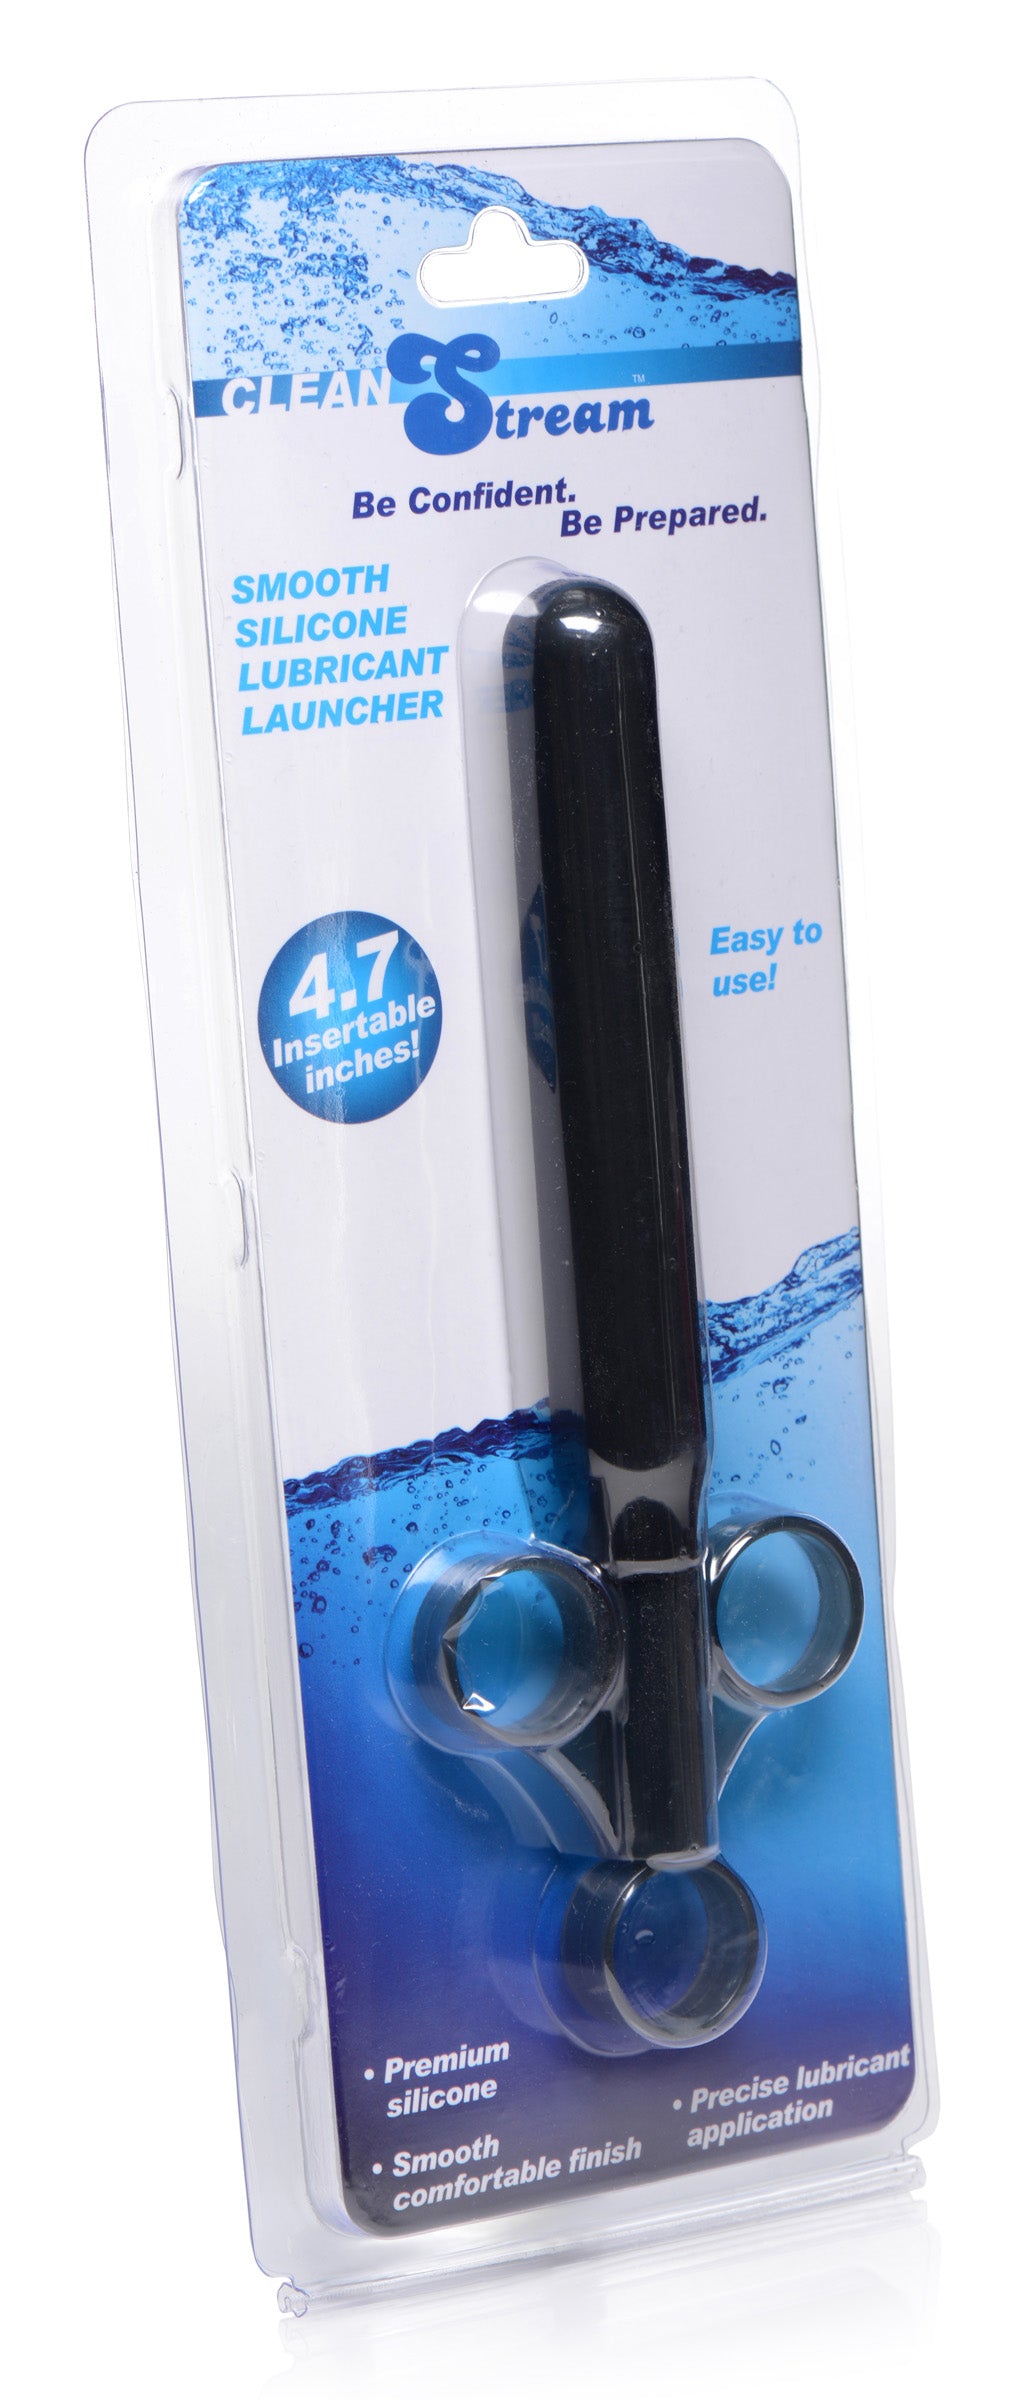 Smooth Silicone Lubricant Launcher - UABDSM